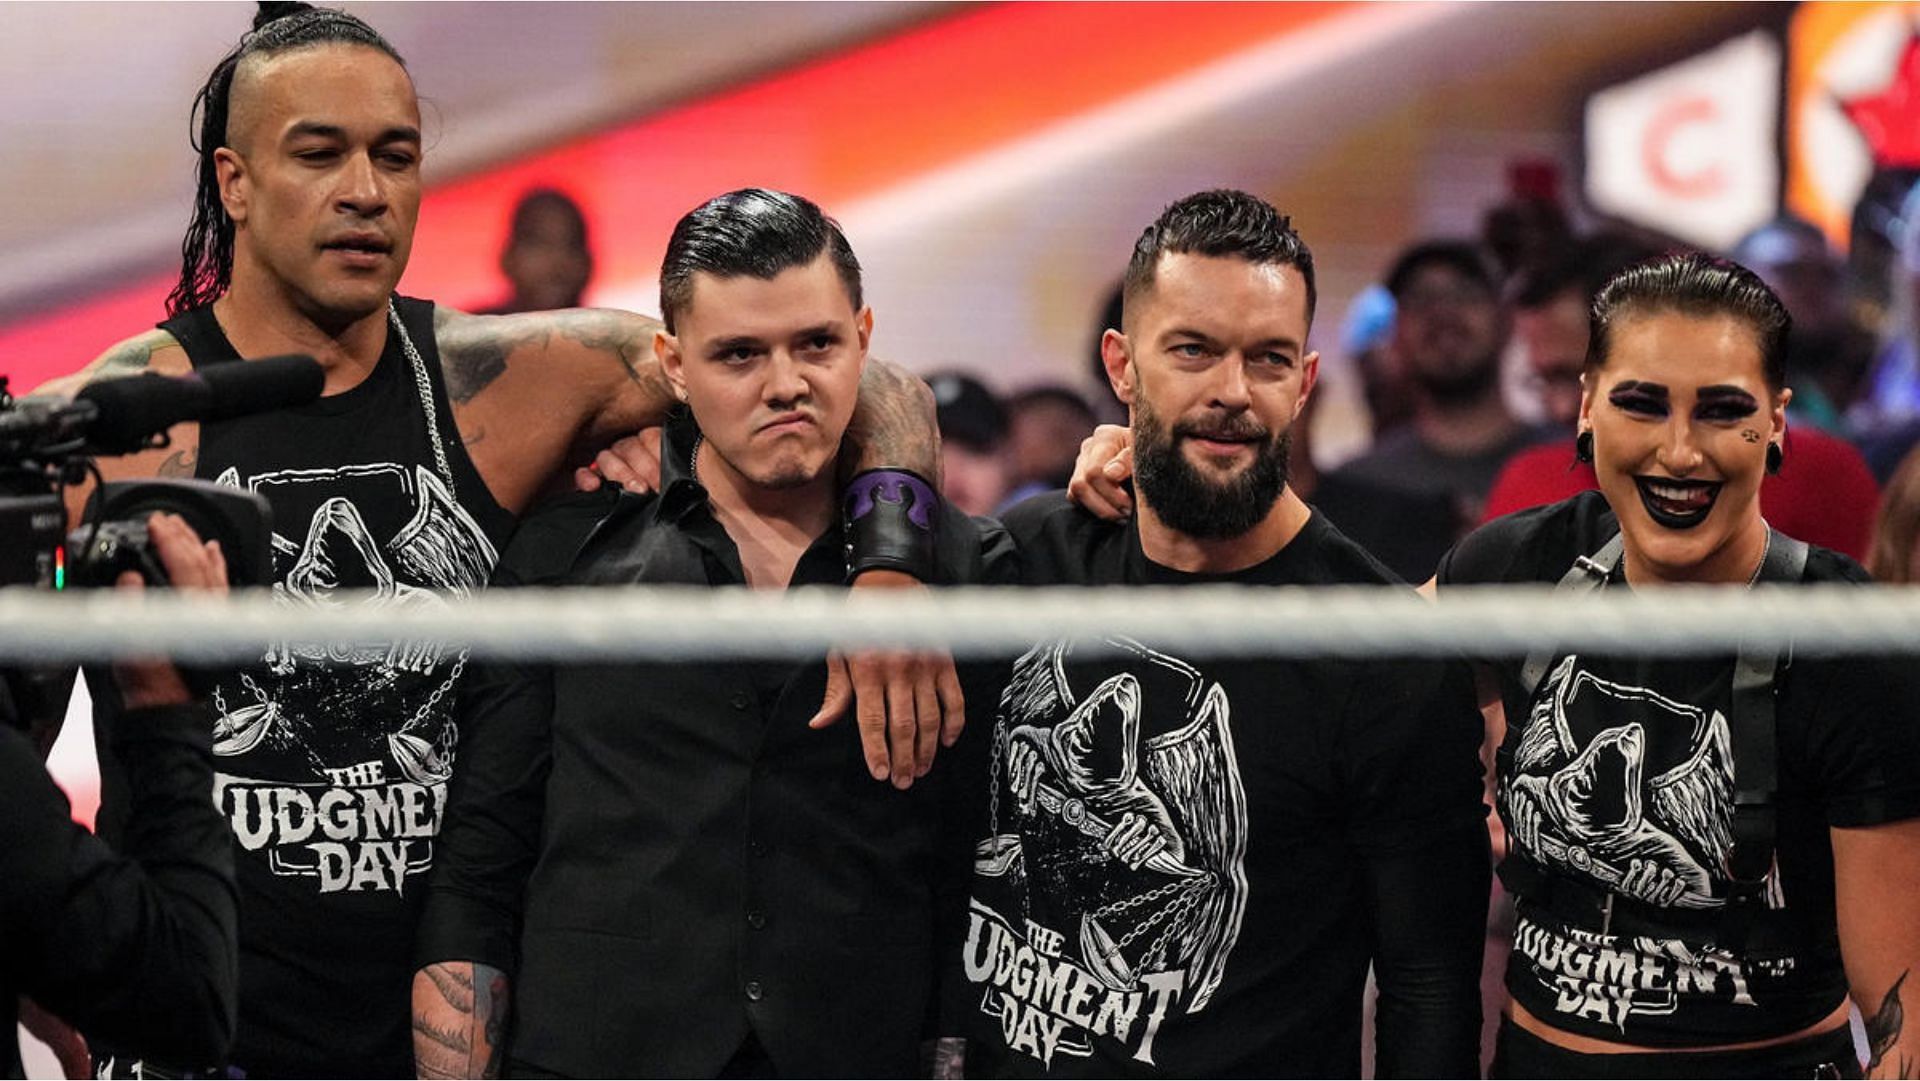 Damian Priest Finn Balor: WWE planted seeds for The Judgment Day's break-up on RAW: What you missed